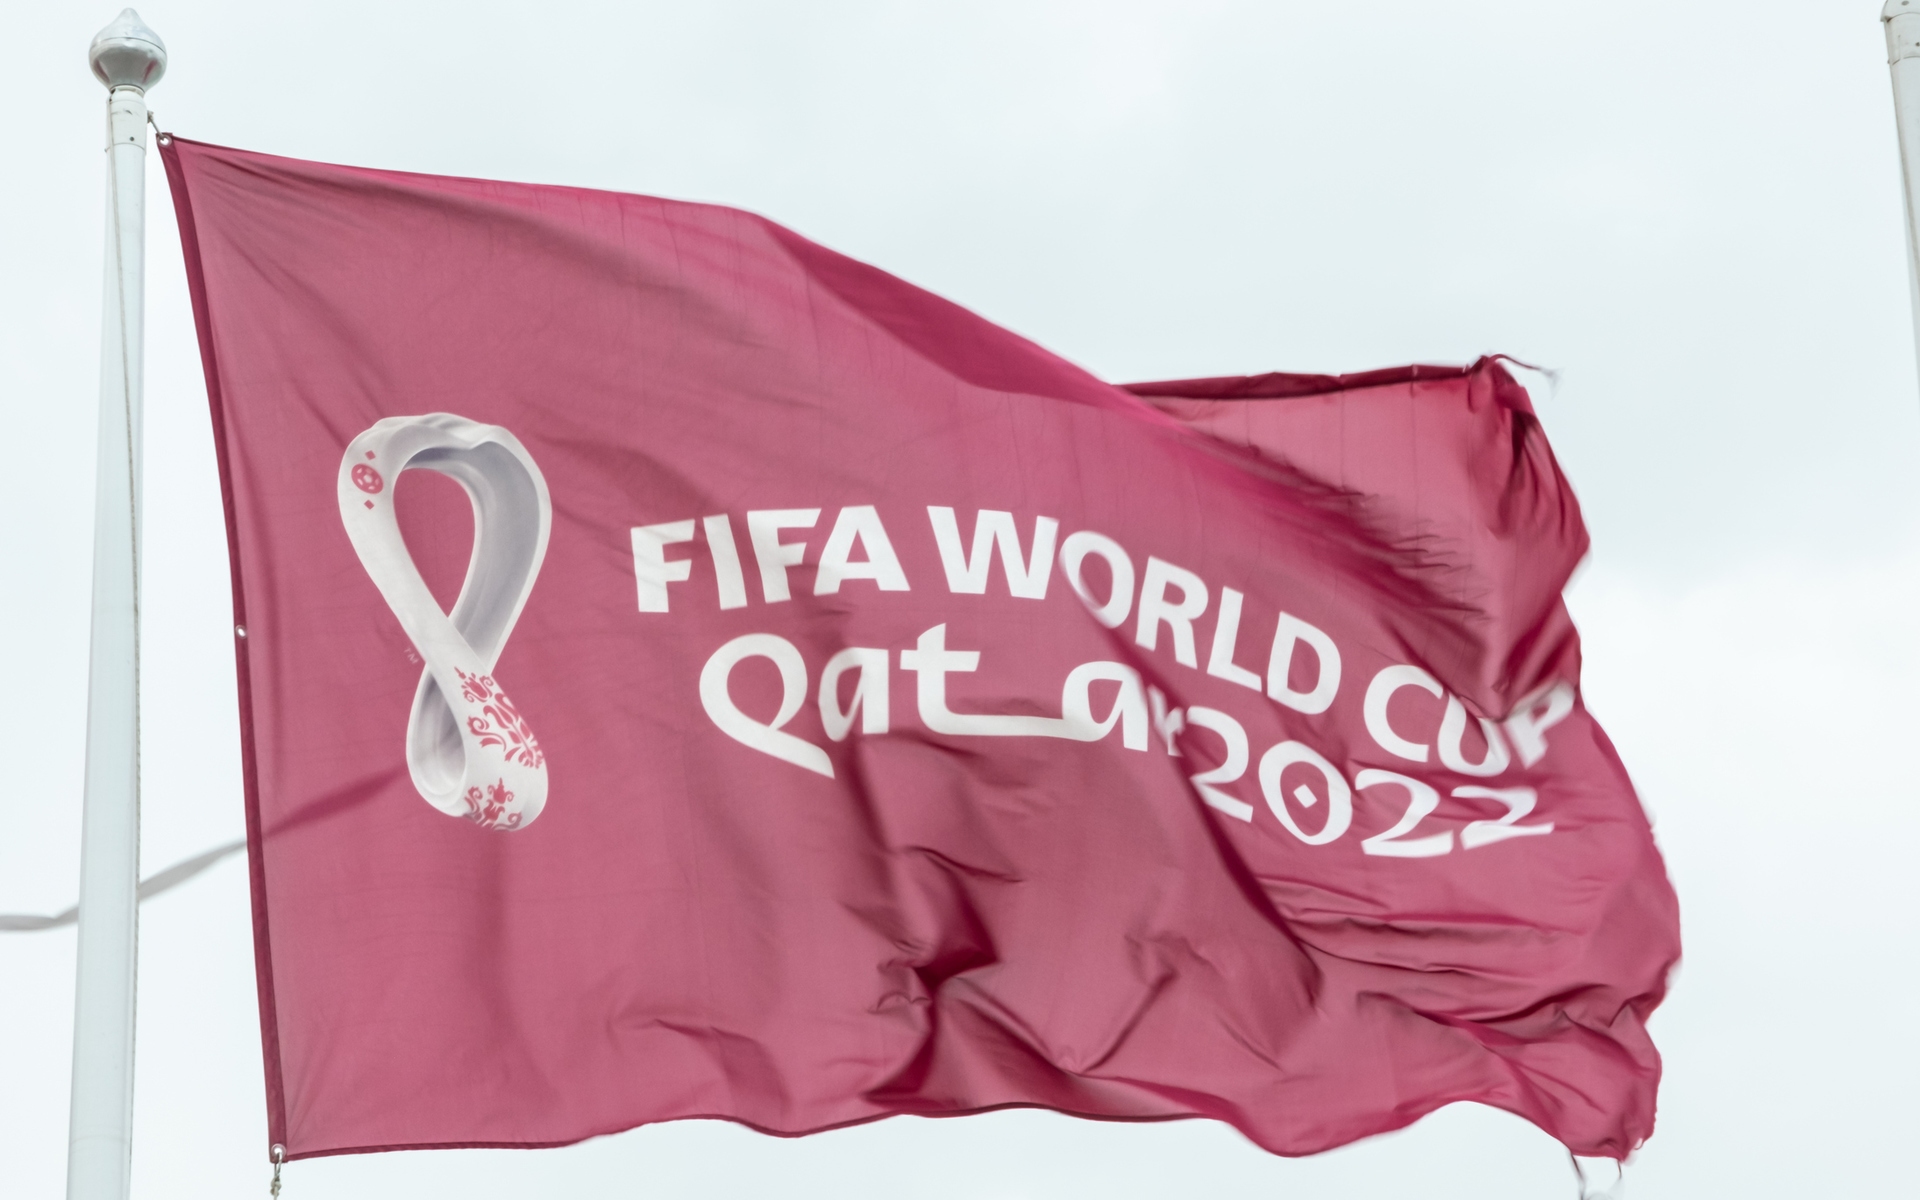 The World Cup begins in Qatar on Sunday.